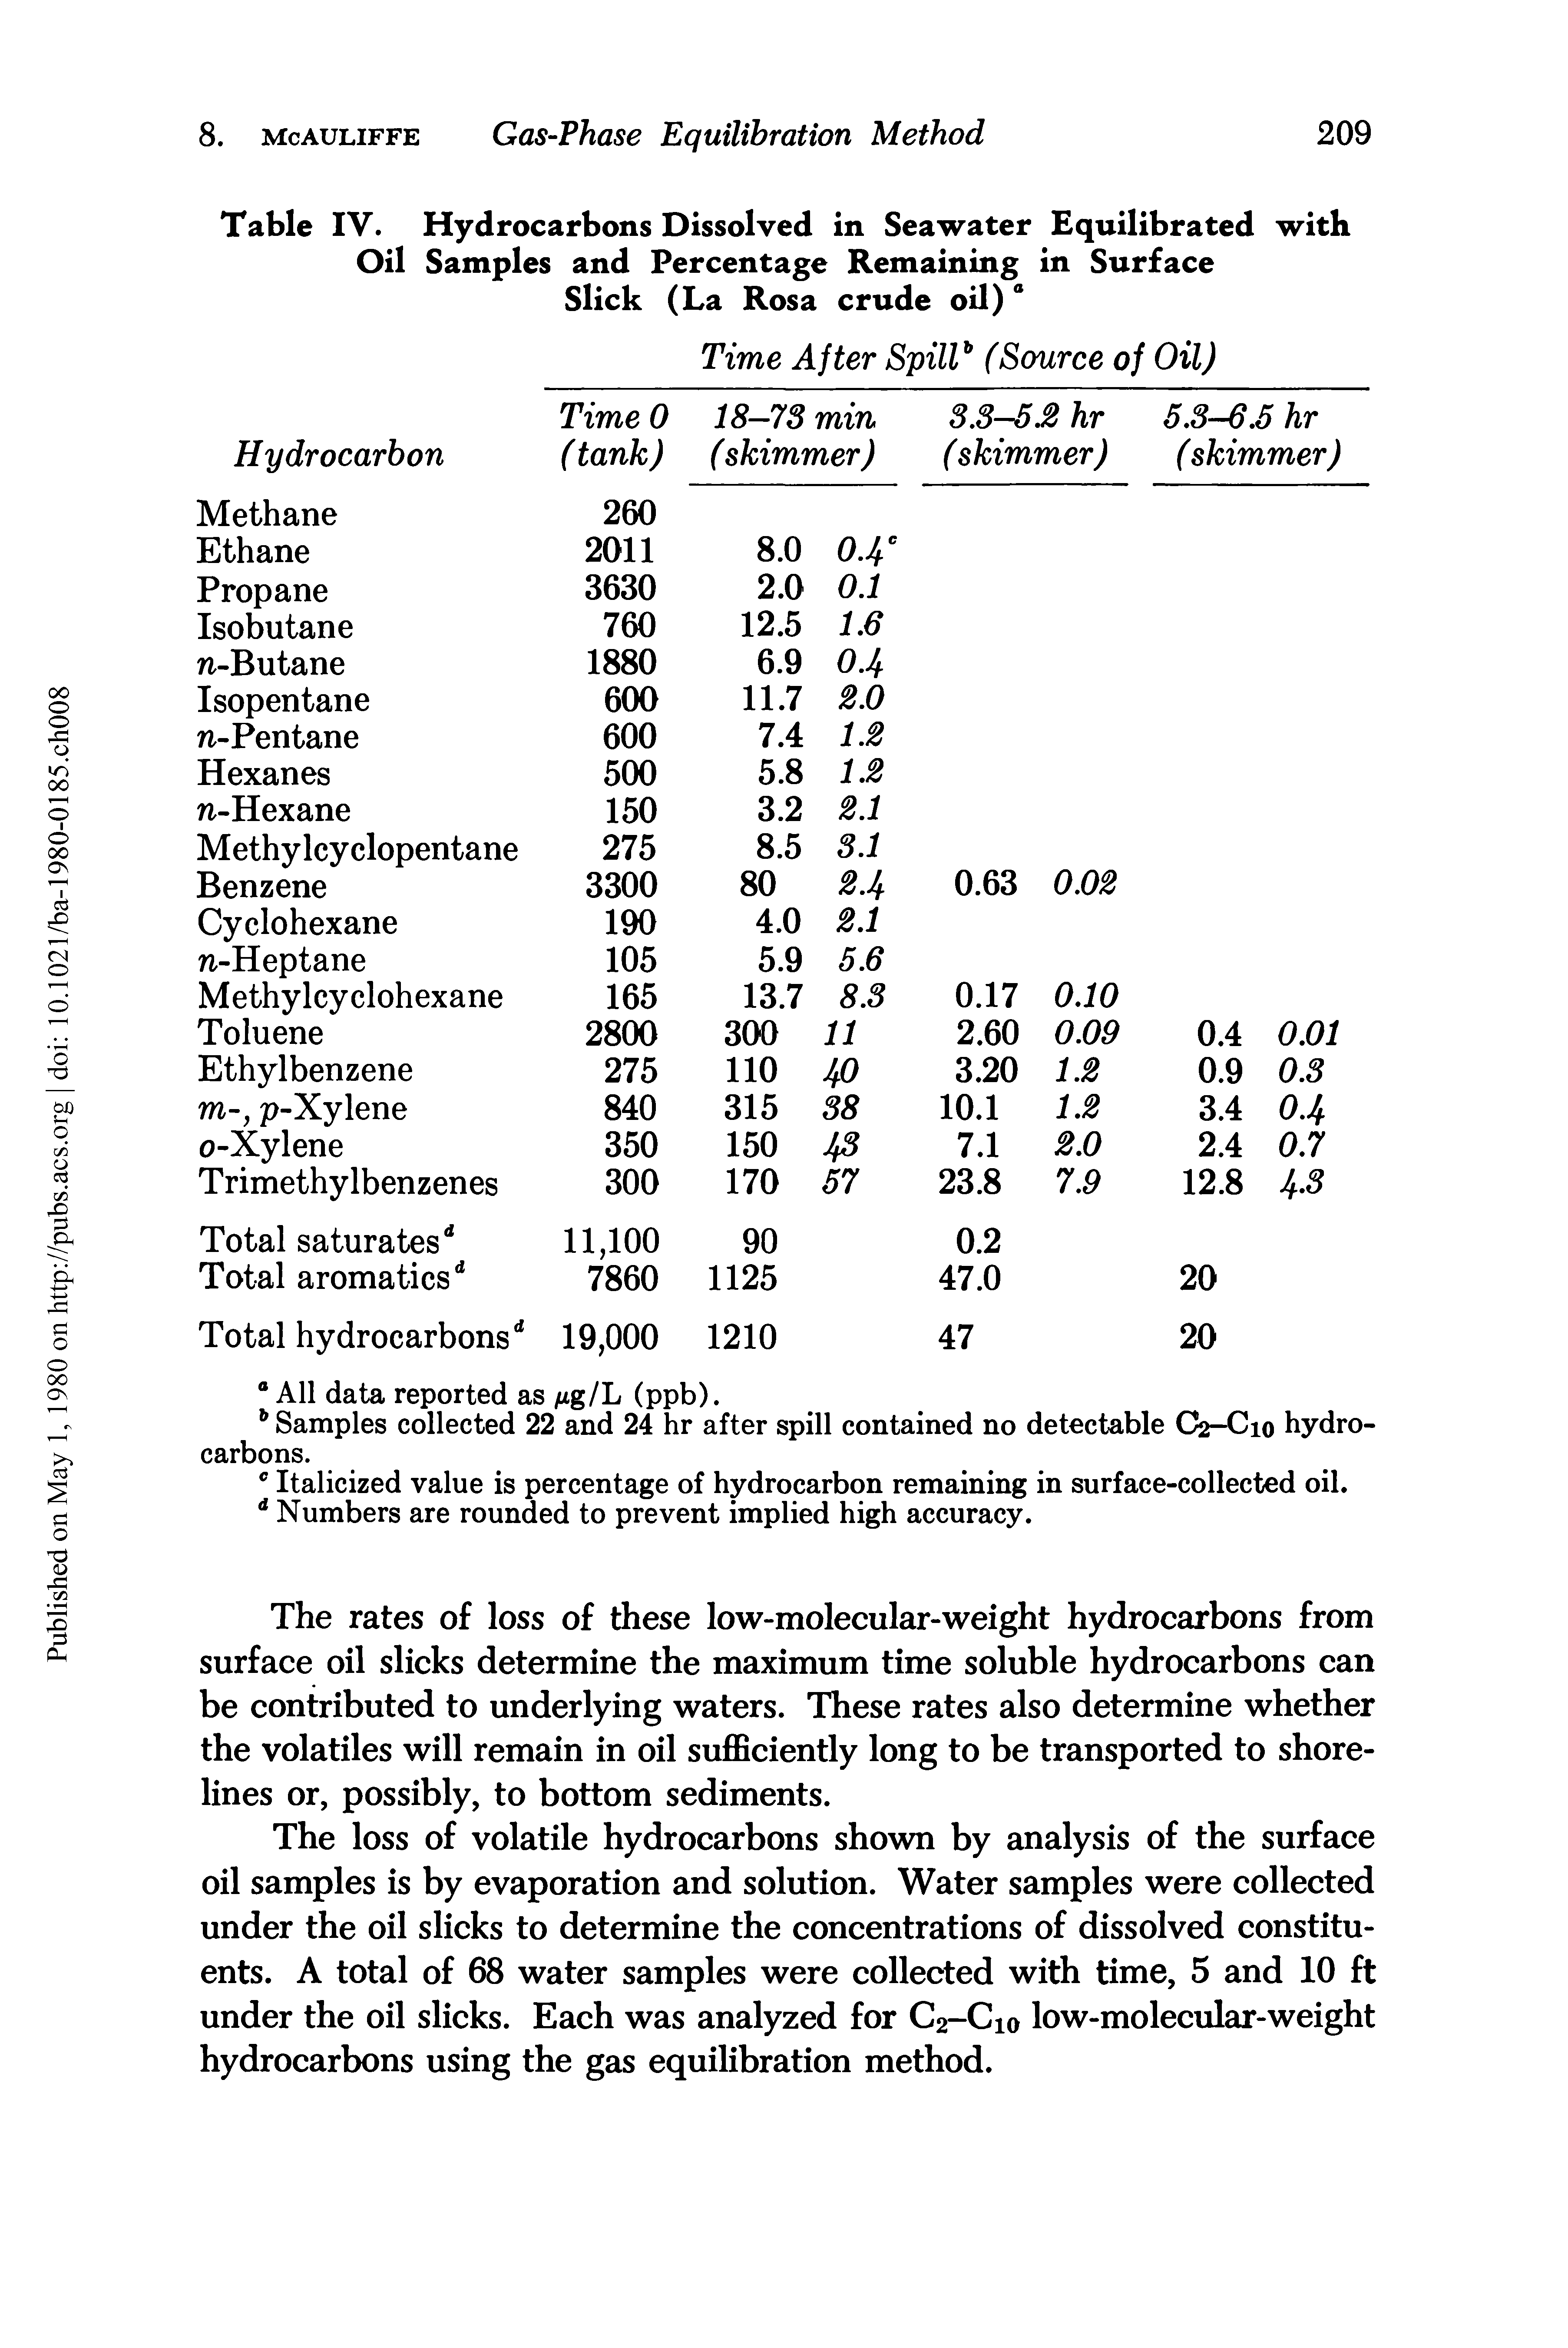 Table IV. Hydrocarbons Dissolved in Seawater Equilibrated with Oil Samples and Percentage Remaining in Surface Slick (La Rosa crude oil) °...